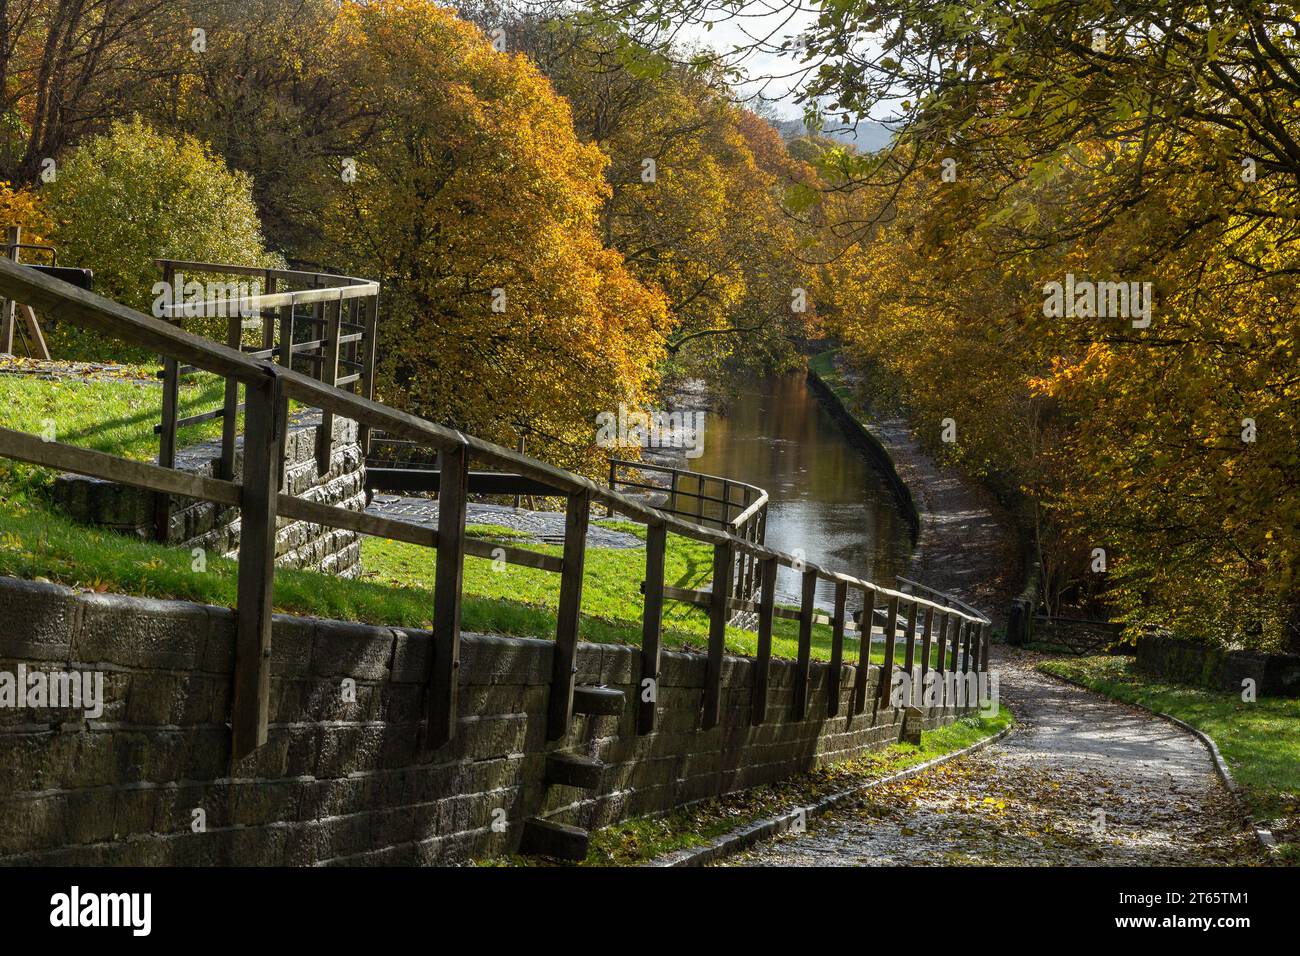 The canal towpath at the side of Bingley Five Rise Locks in Yorkshire. The trees next to the Leeds Liverpool canal are in full autumn colour. Stock Photo